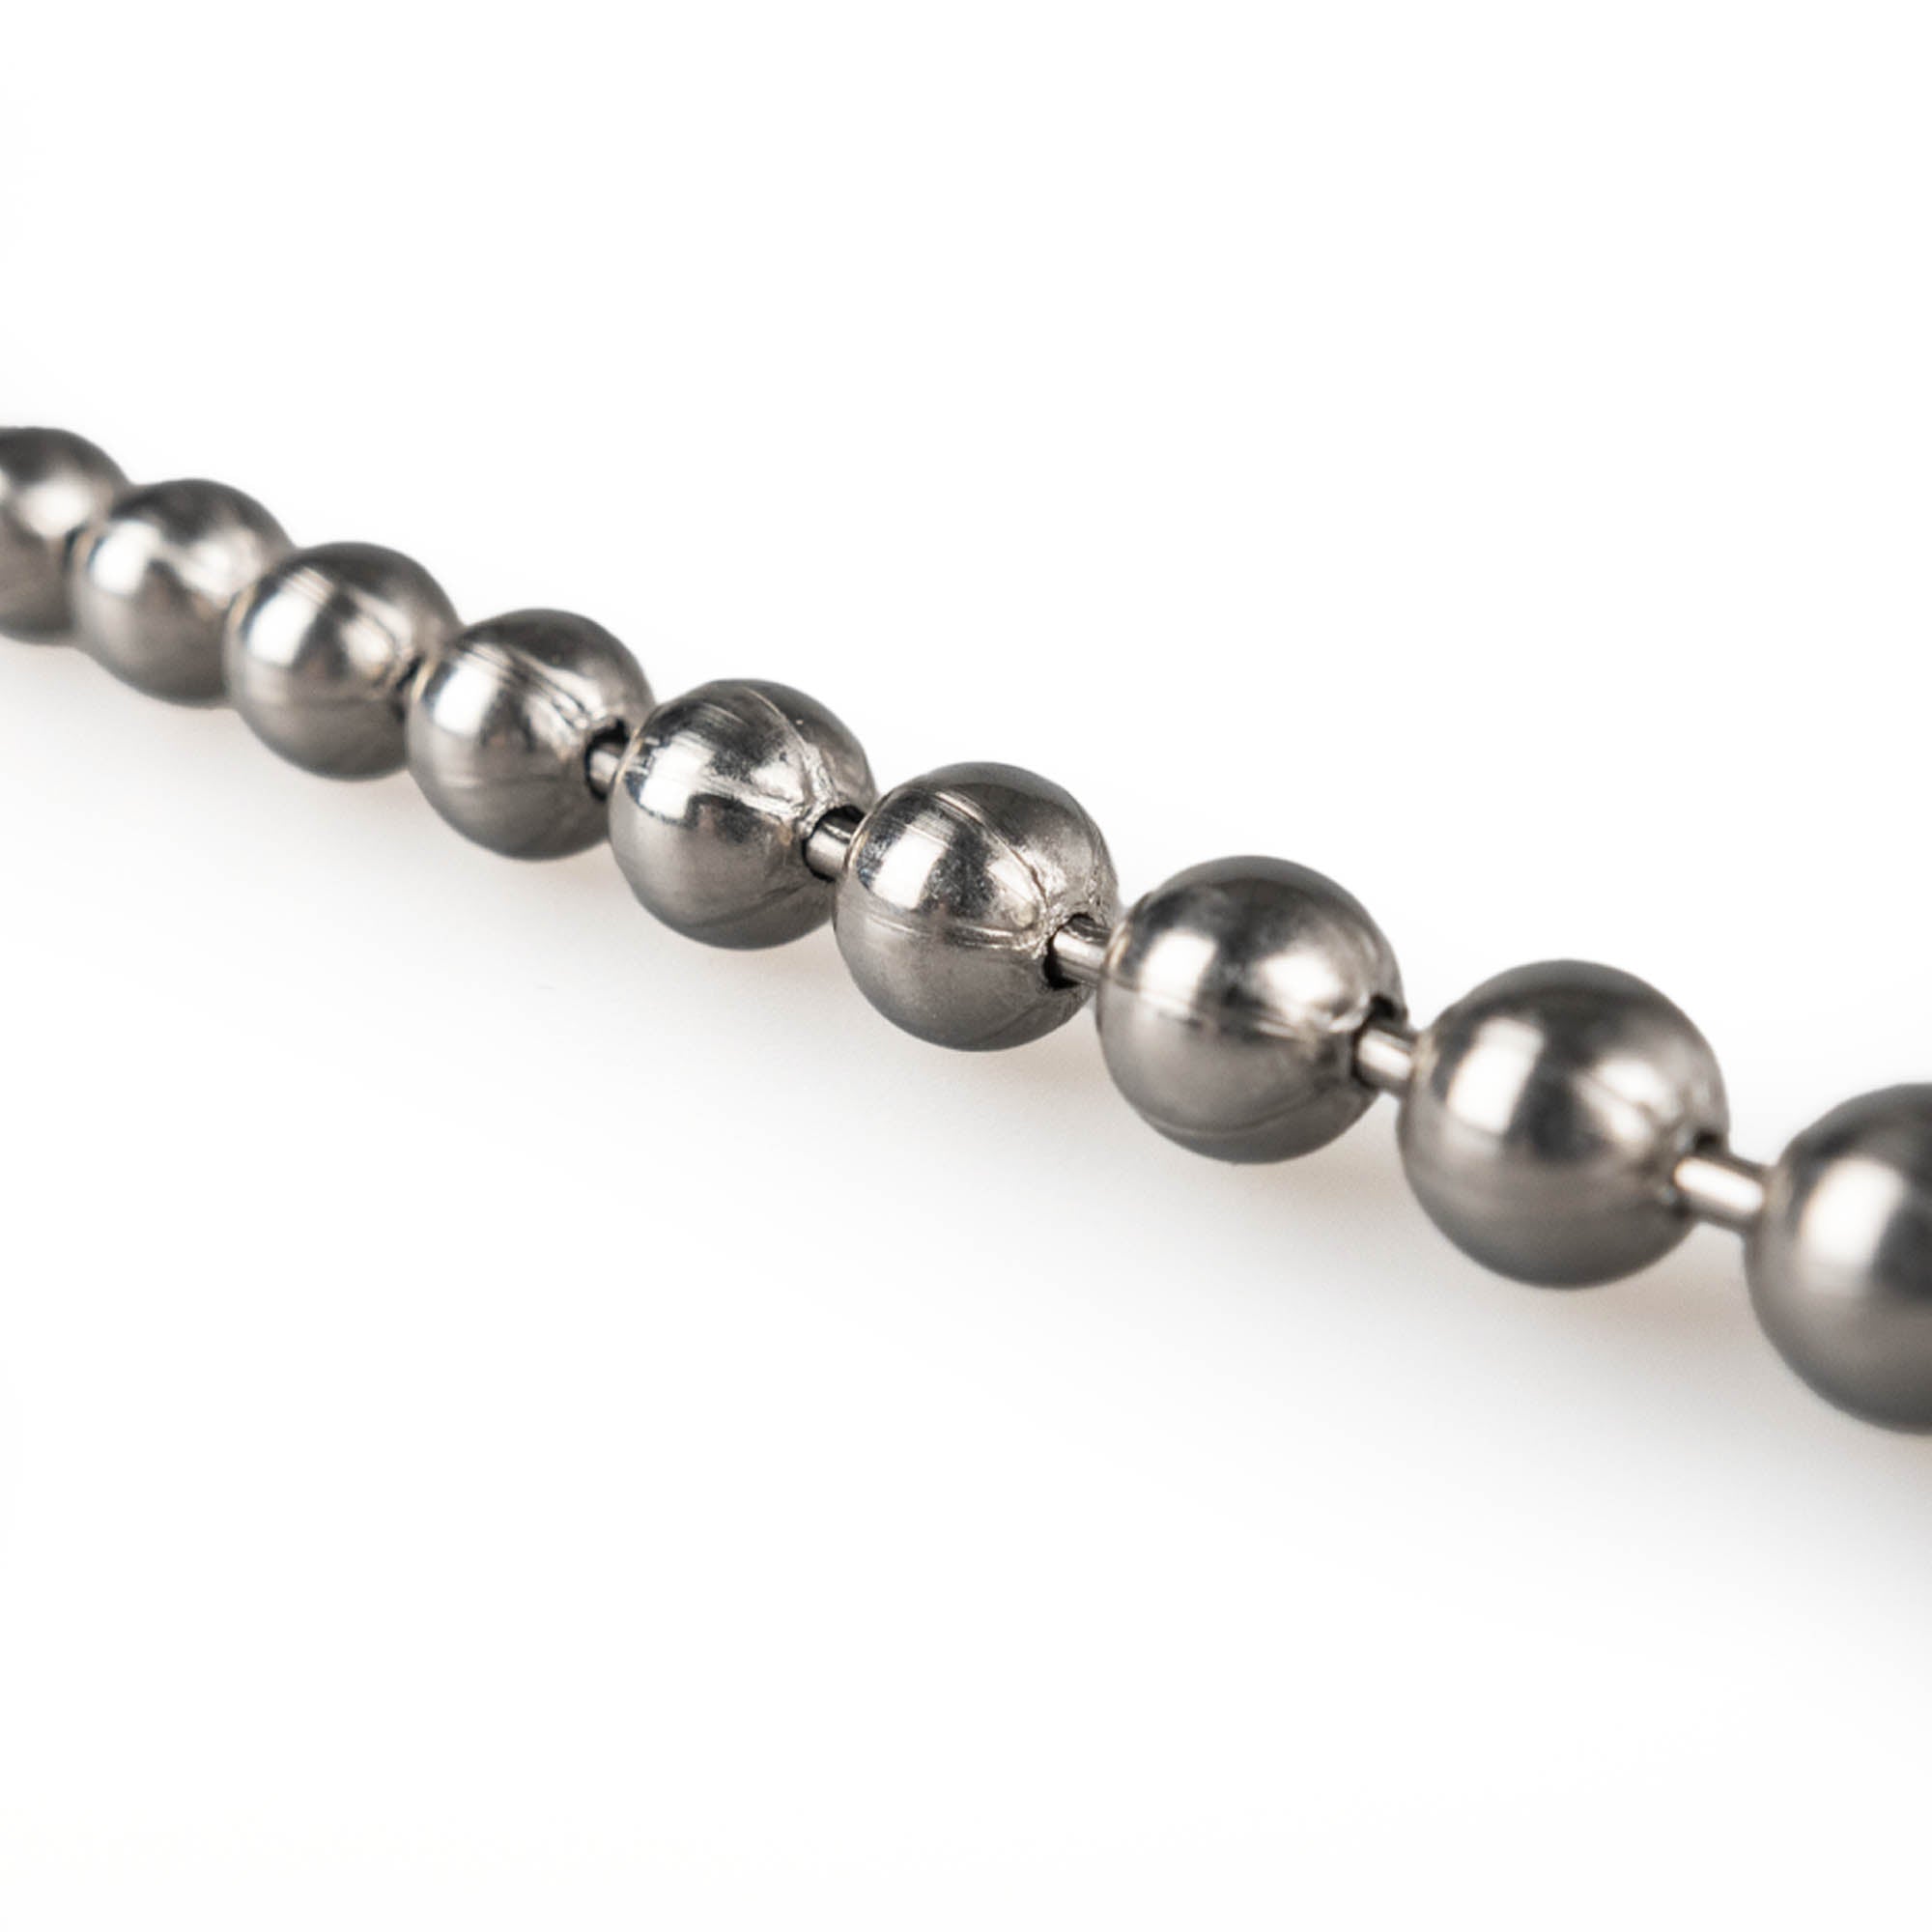 Close up of the ball chain